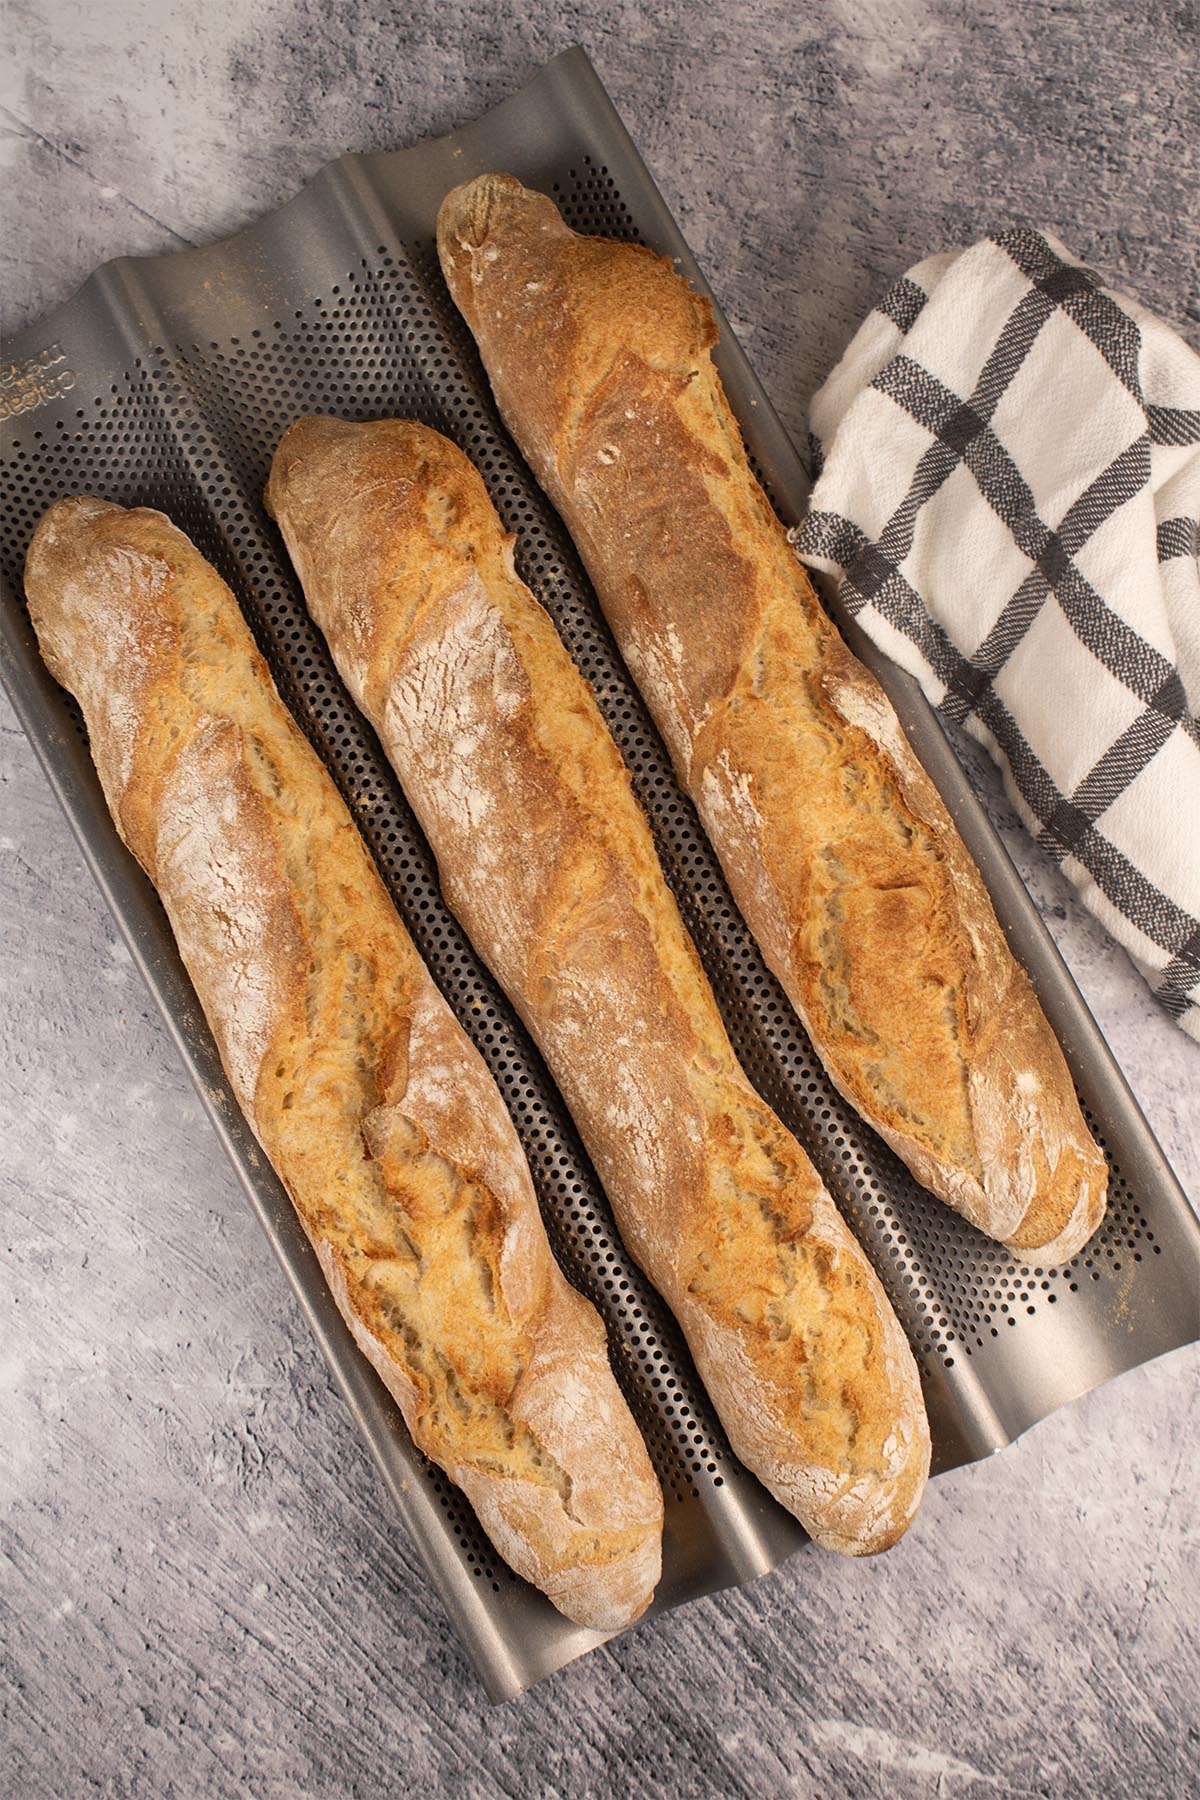 Three baguettes in a baguette baking tray beside black and white towel